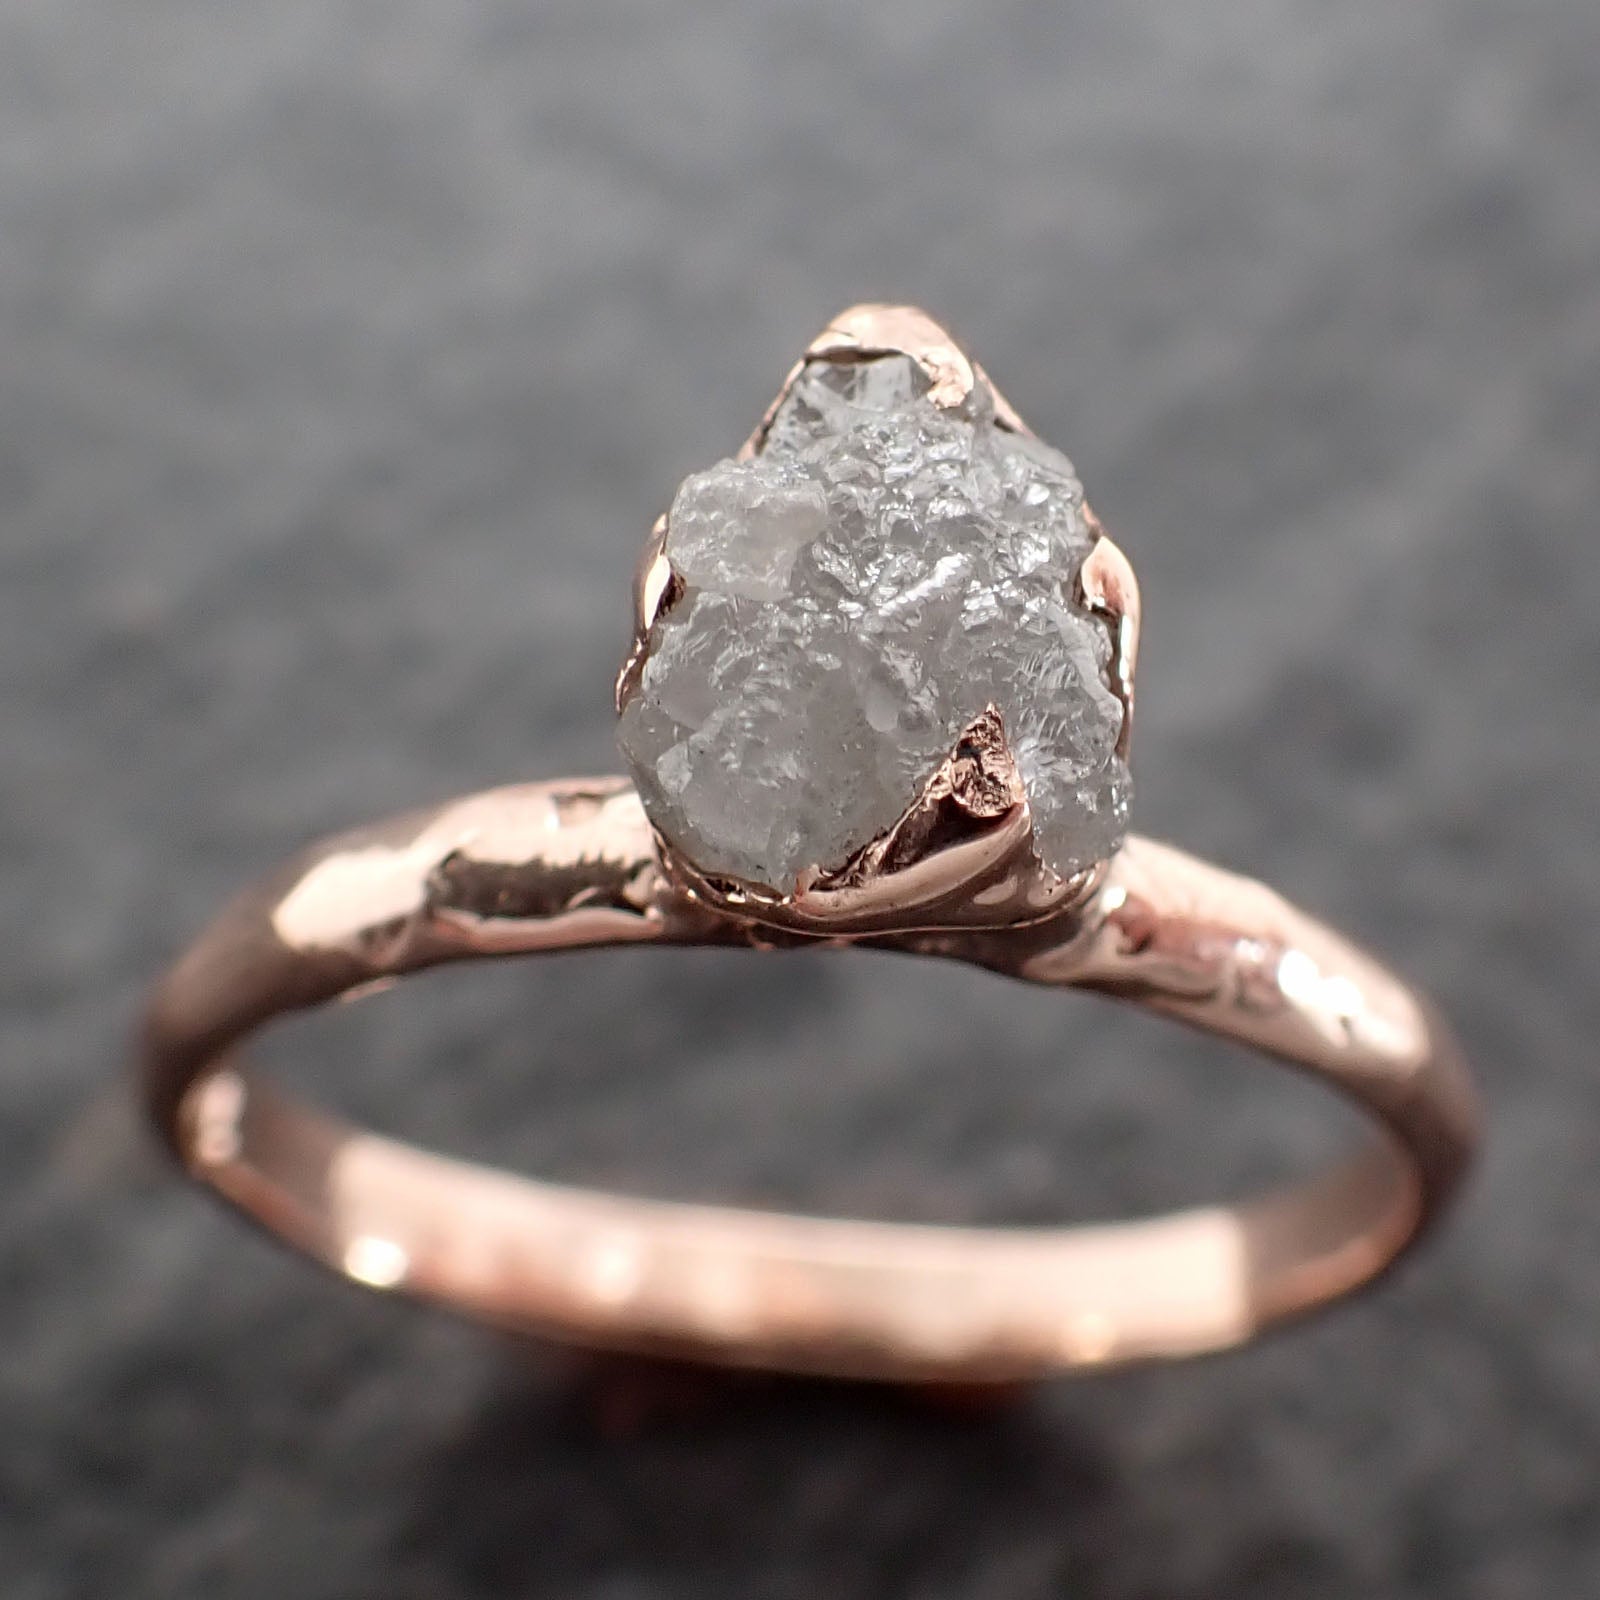 Raw Rough UnCut Diamond Engagement Ring Rough Diamond Solitaire Recycled 14k Rose gold Conflict Free Diamond Wedding Promise byAngeline 2706